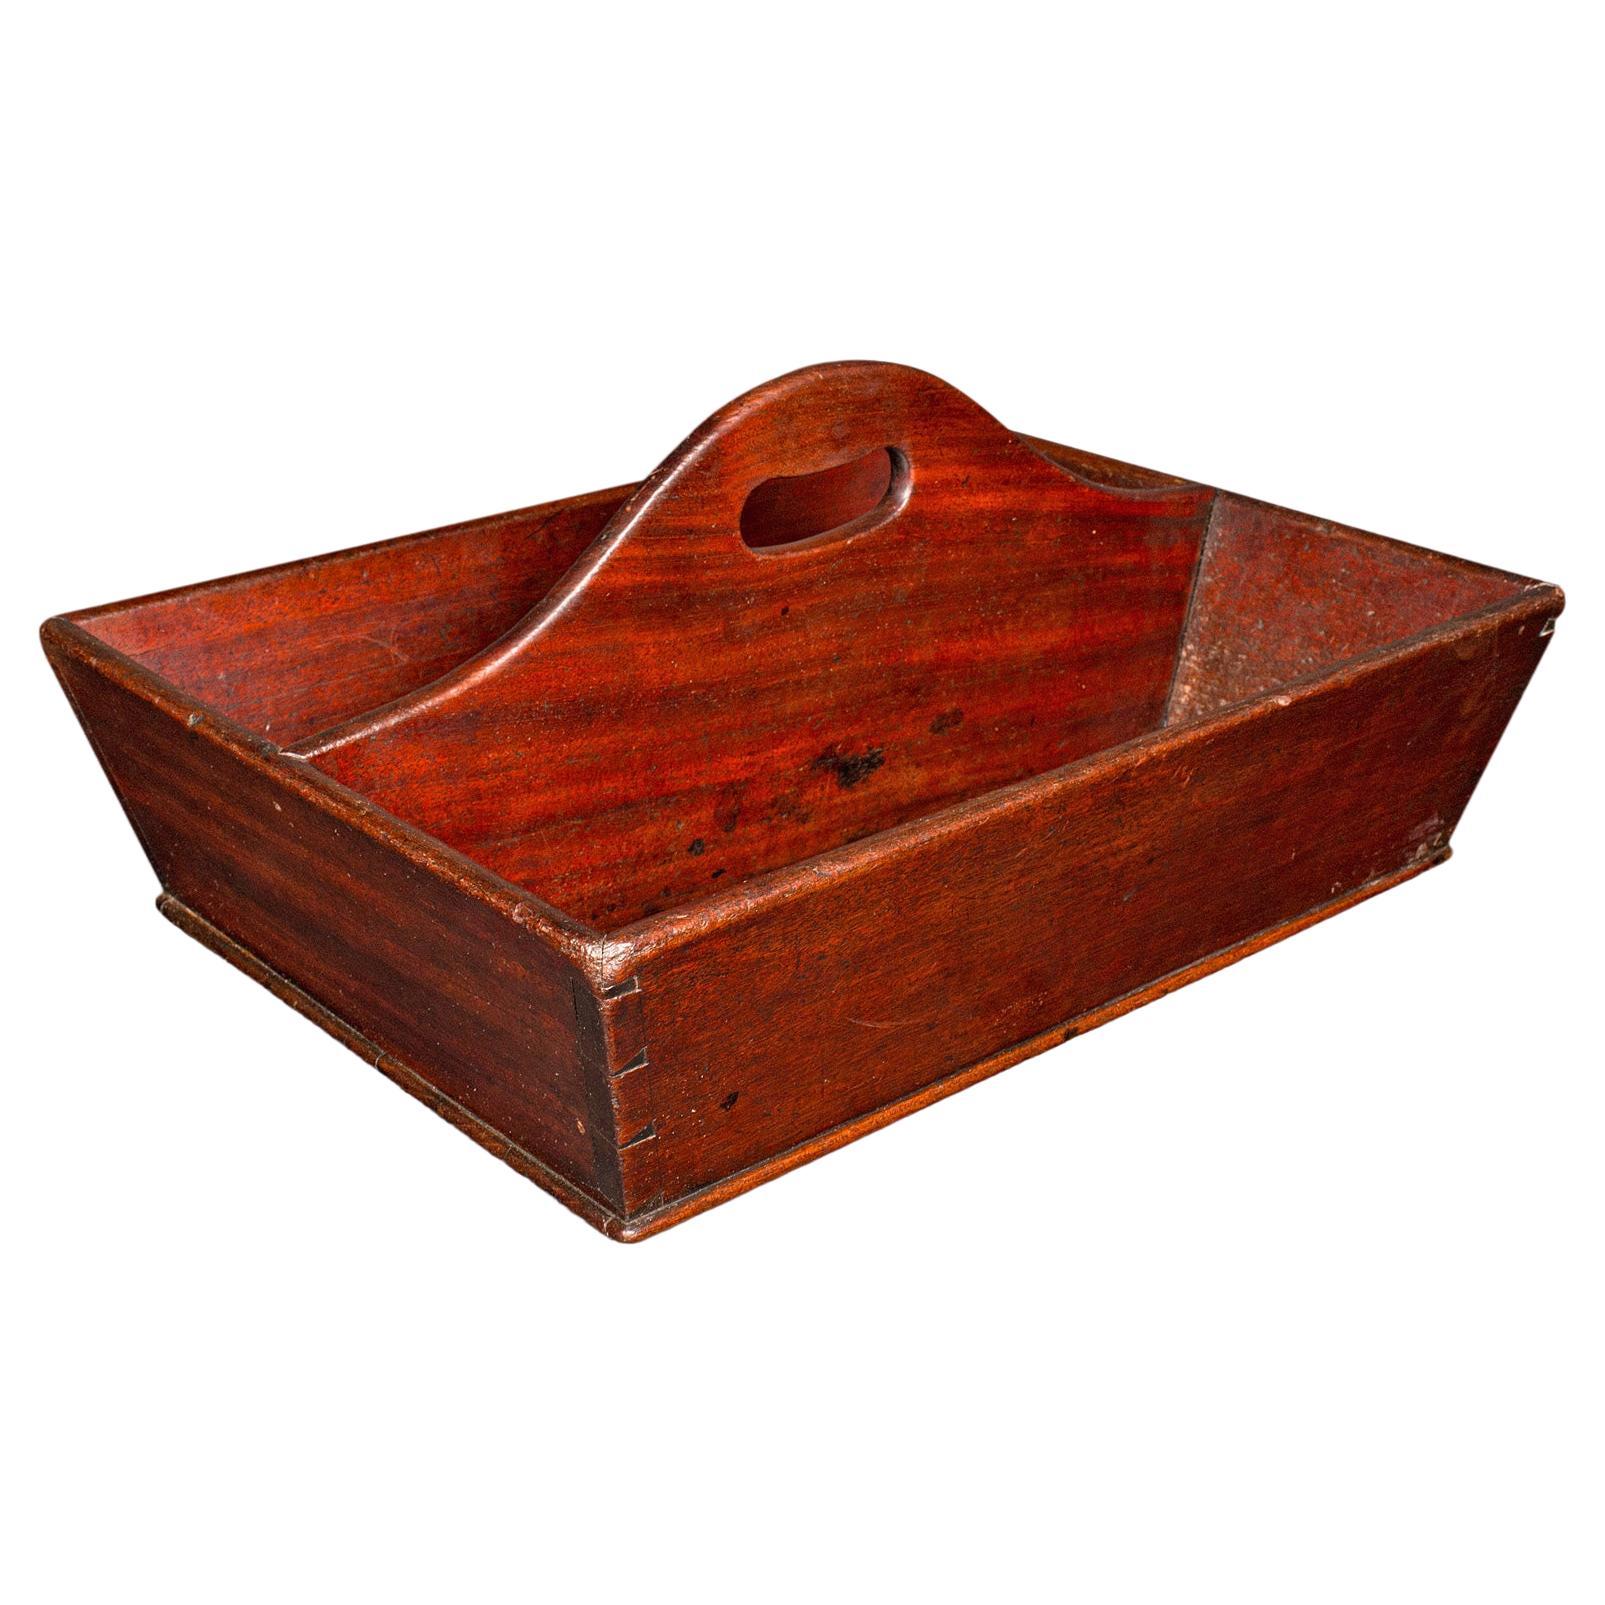 Antique Butler's Duties Trug, English, Two Division Cutlery Tray, Georgian, 1800 For Sale